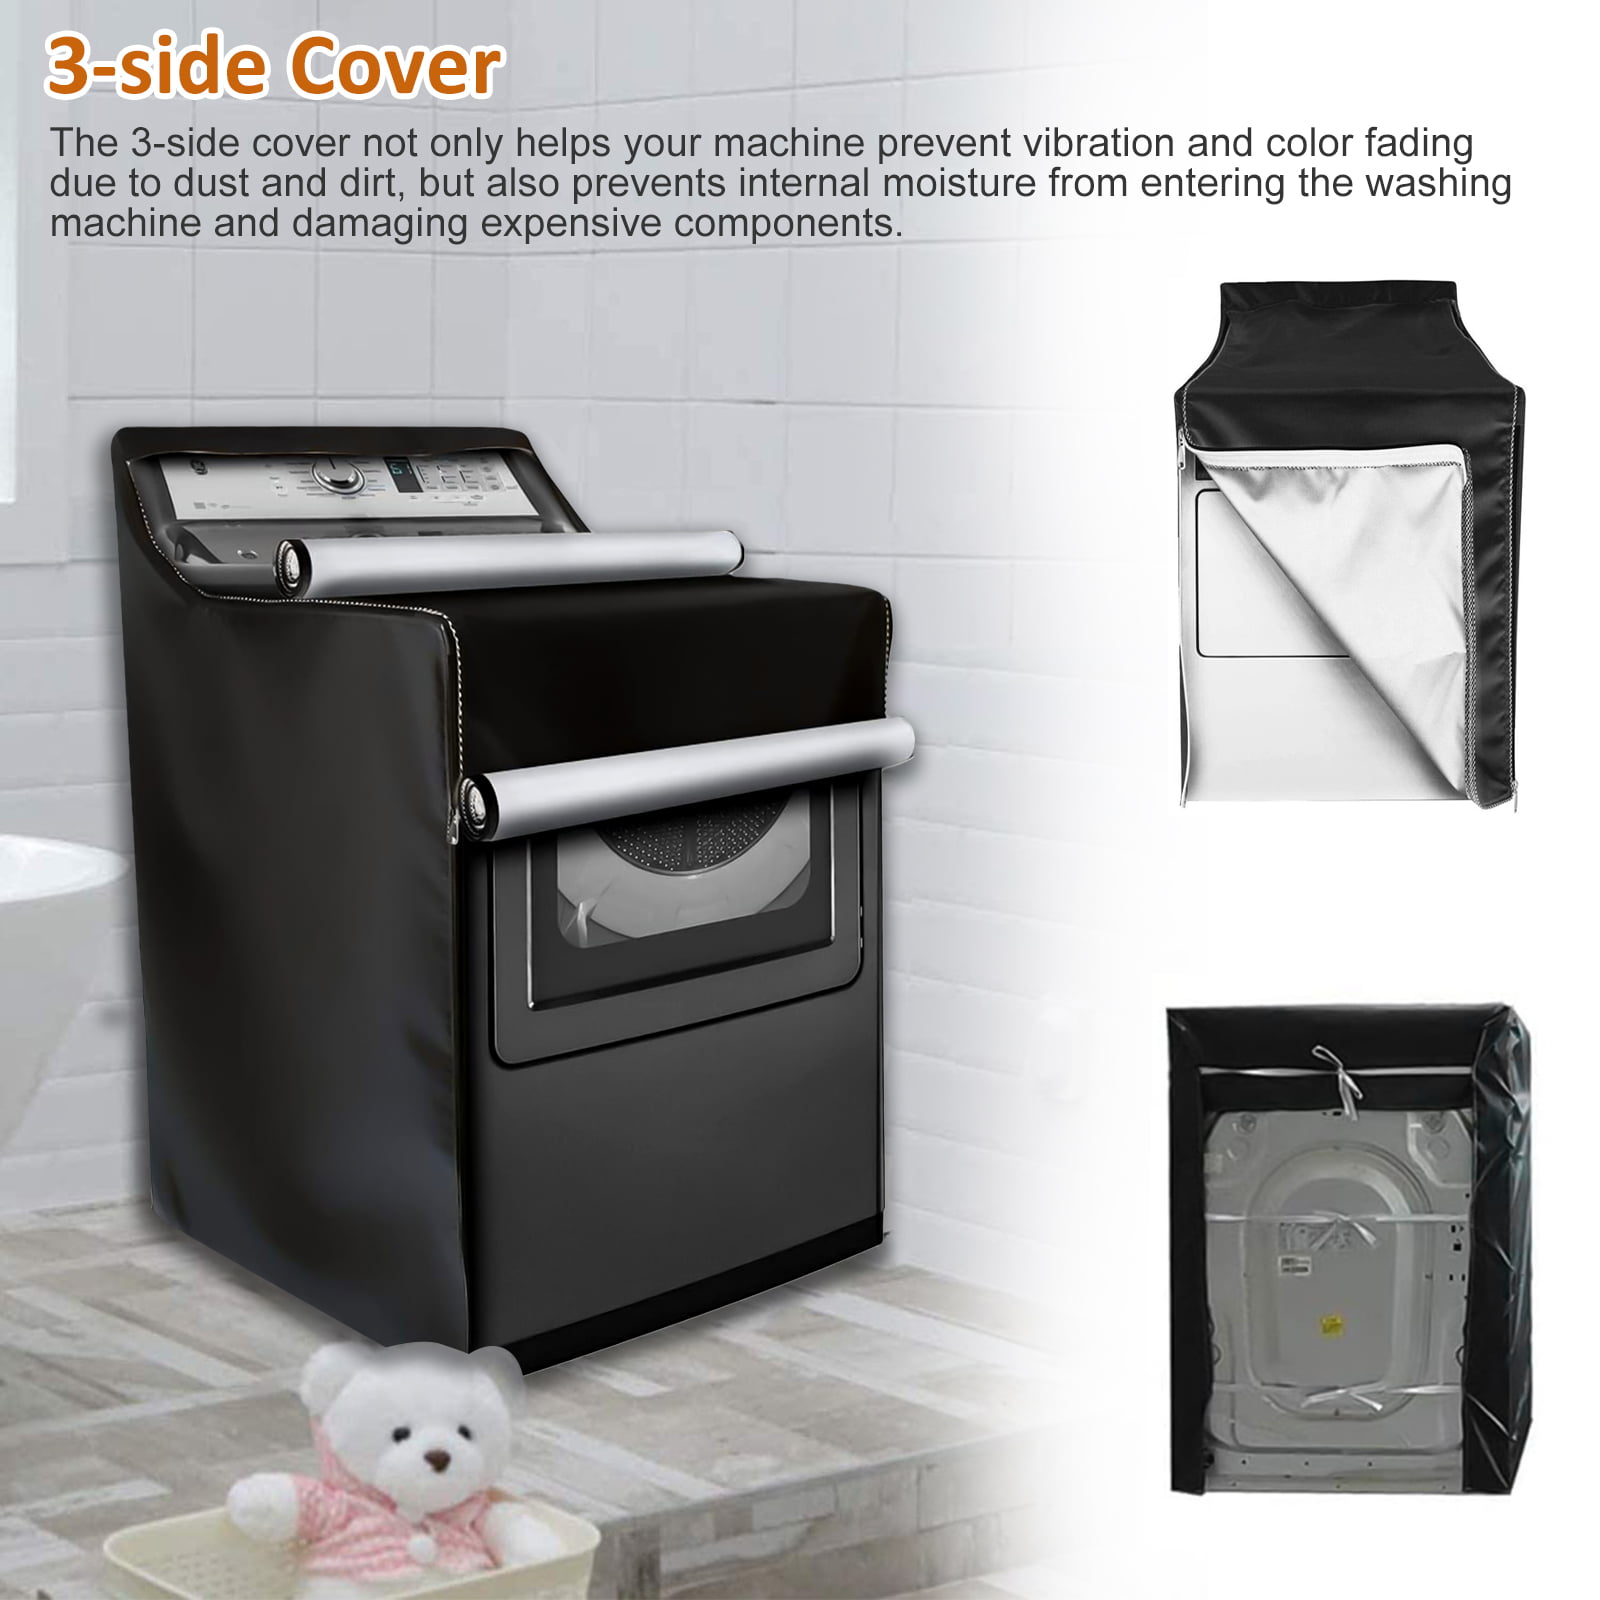 W27 D33 H39 in, No lace Washer/Dryer Cover for Front-Loading Machine Waterproof dustproof Thin 